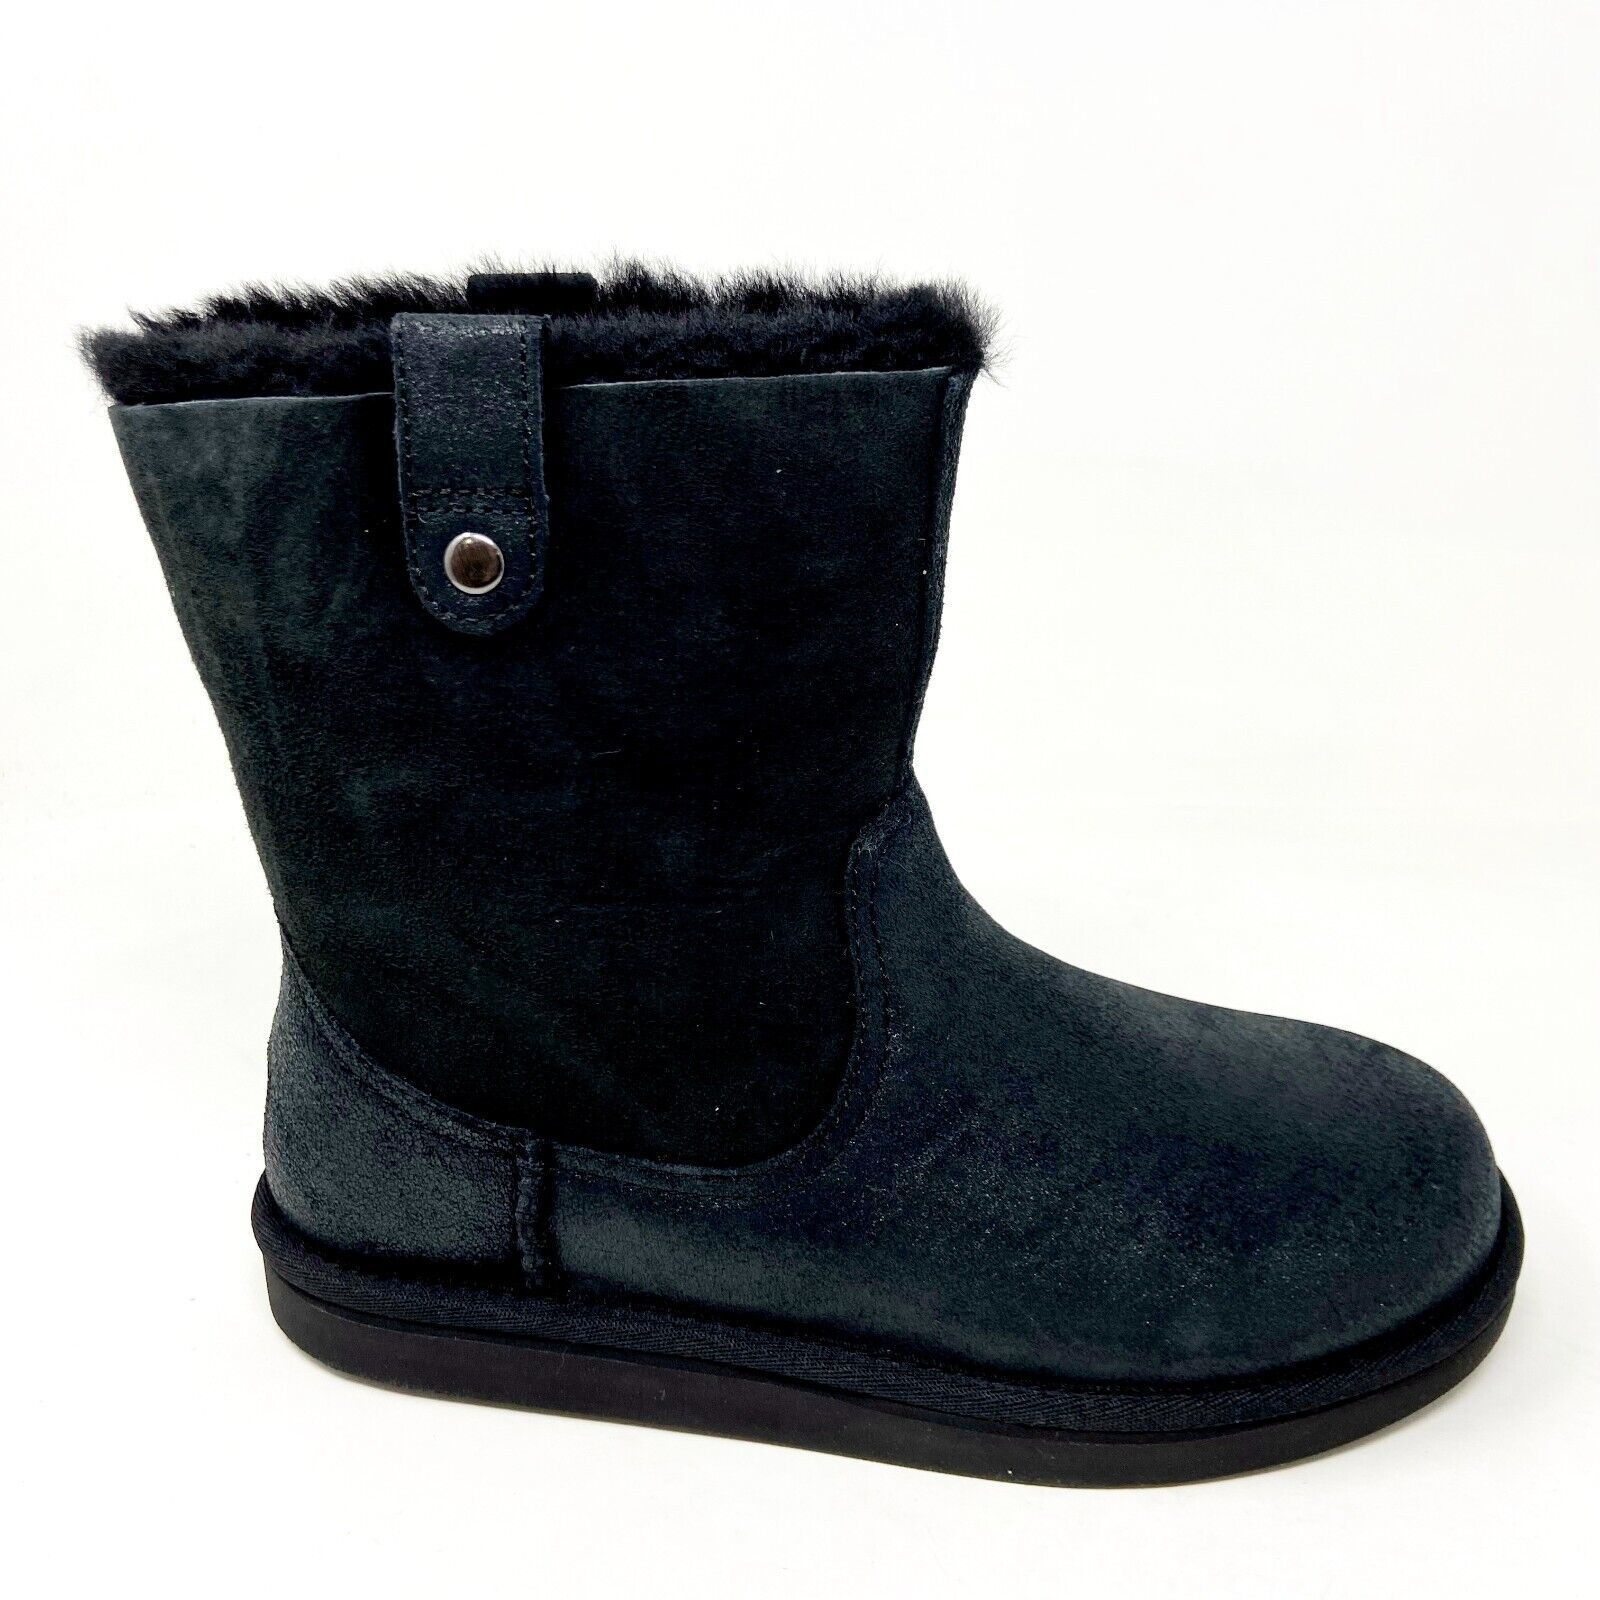 Primary image for UGG Haydee Black Kids Girls Size 5 Casual Rain Boots 1013286